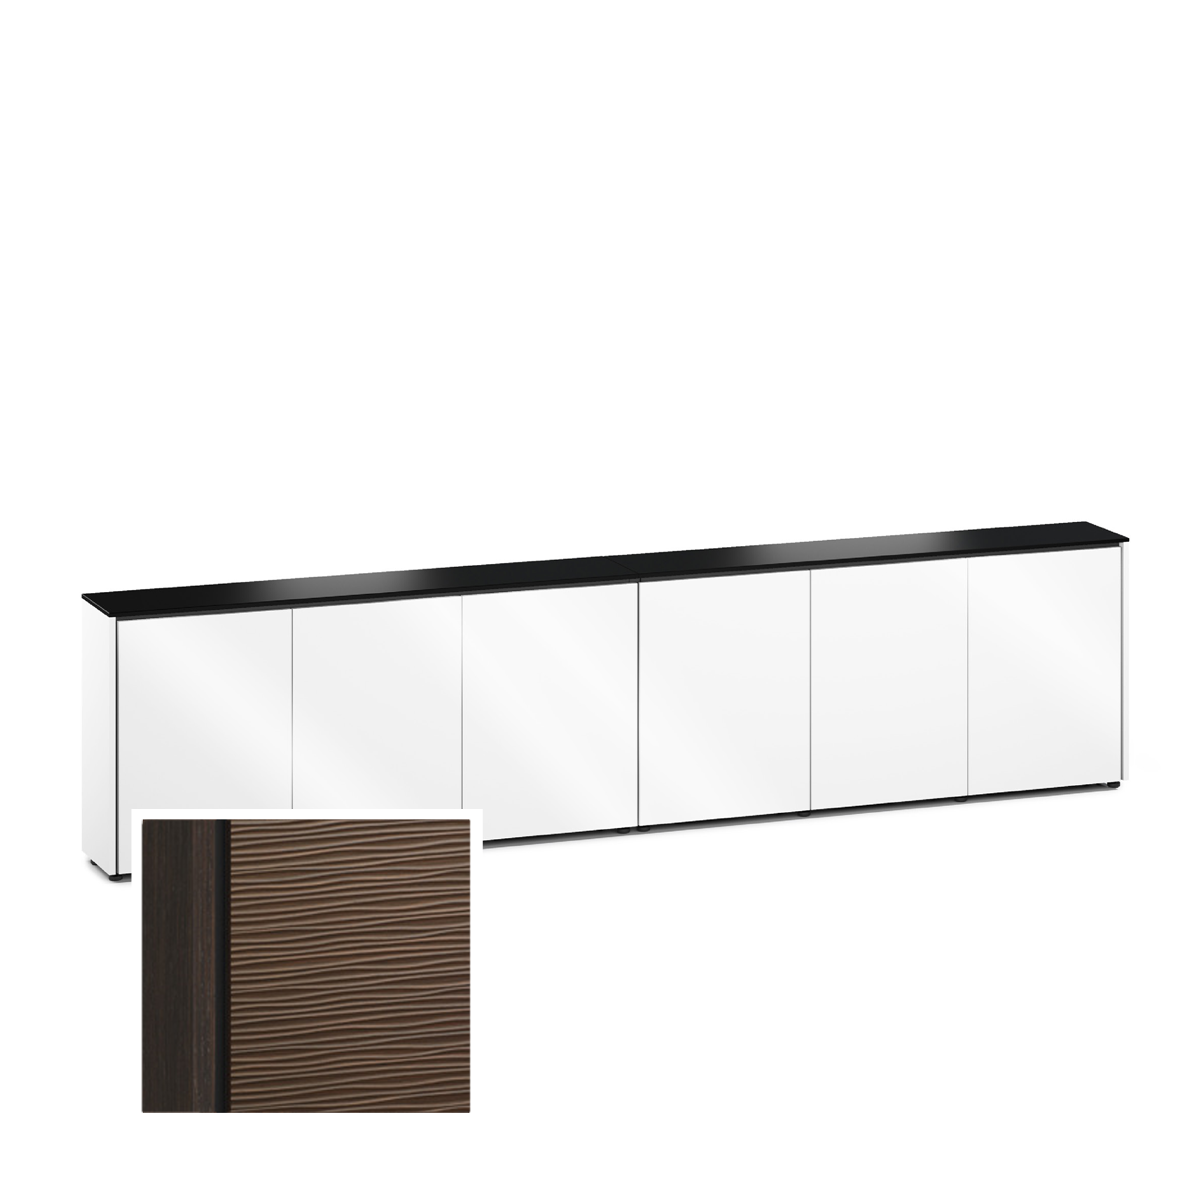 D1/367A/BL/WE 6 Bay Low-Profile, Wall Cabinet, Berlin/Wave Texture- Wenge